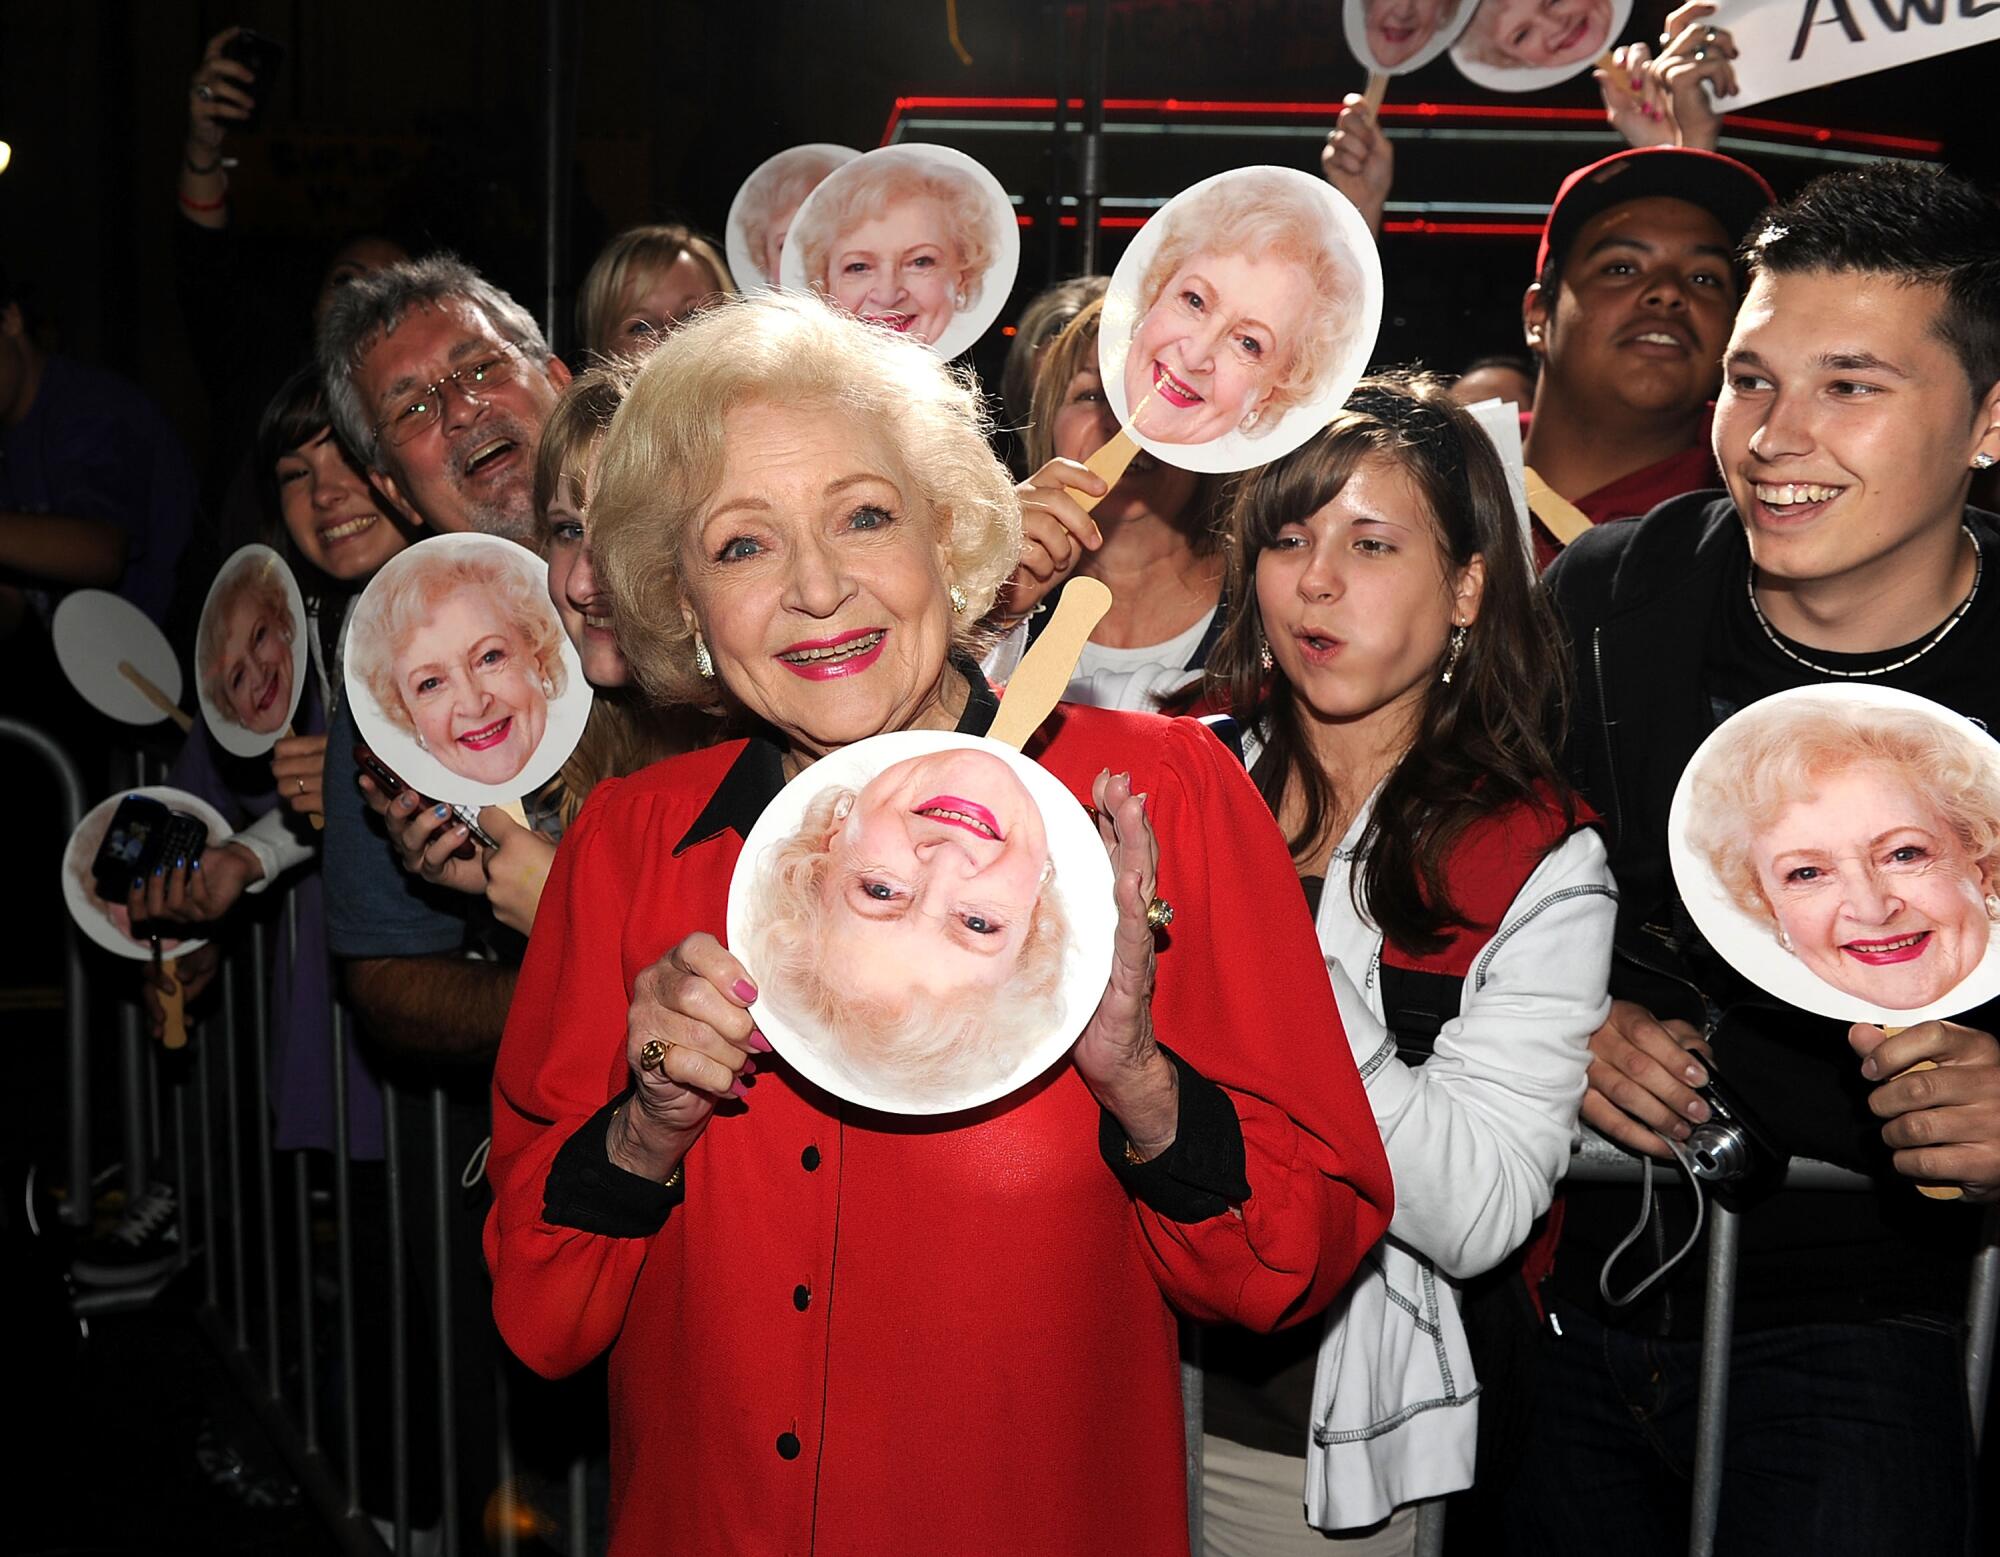 Actress Betty White arrives at the premiere of "You Again" at the El Capitan Theatre.